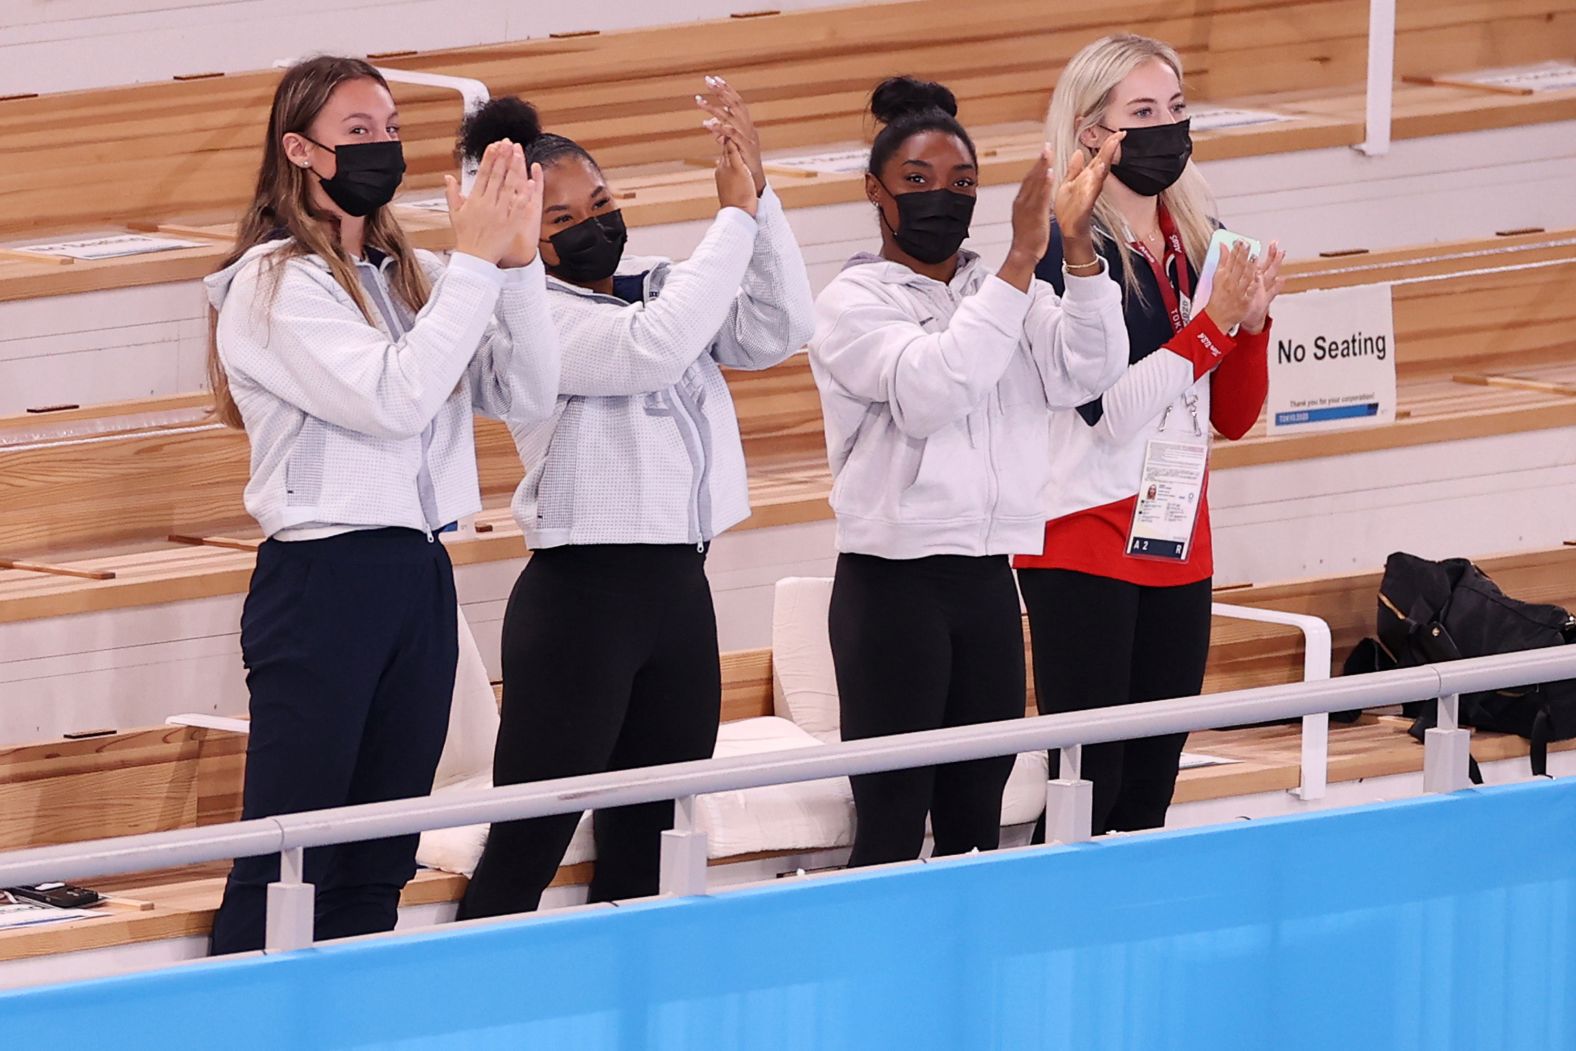 From left, US gymnasts Grace McCallum, Jordan Chiles, Simone Biles and MyKayla Skinner cheer for teammate Suni Lee after her gold-medal performance on July 29. Biles, the defending champion, <a href="index.php?page=&url=https%3A%2F%2Fwww.cnn.com%2F2021%2F07%2F28%2Fsport%2Fsimone-biles-gymnastics-tokyo-2020-mental-health-spt-intl%2Findex.html" target="_blank">withdrew from the event</a> because of mental-health concerns. <em>Correction: This caption has been updated to include Grace McCallum, who was previously misidentified by Getty Images.</em>